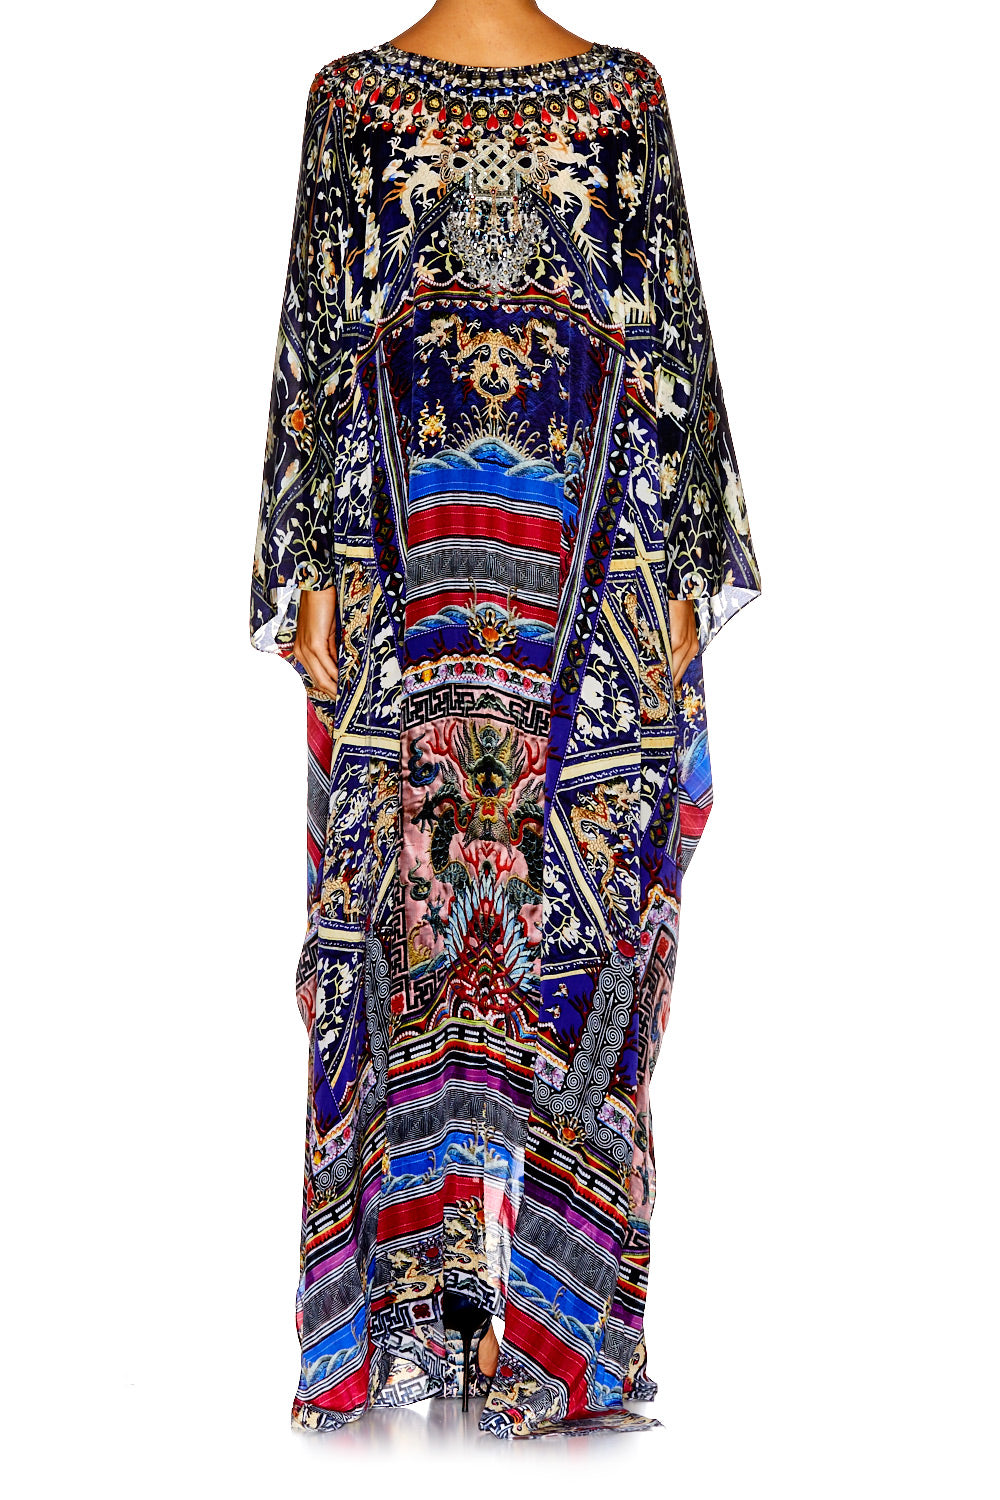 STITCH OF TIME SPLIT FRONT AND SLEEVE KAFTAN